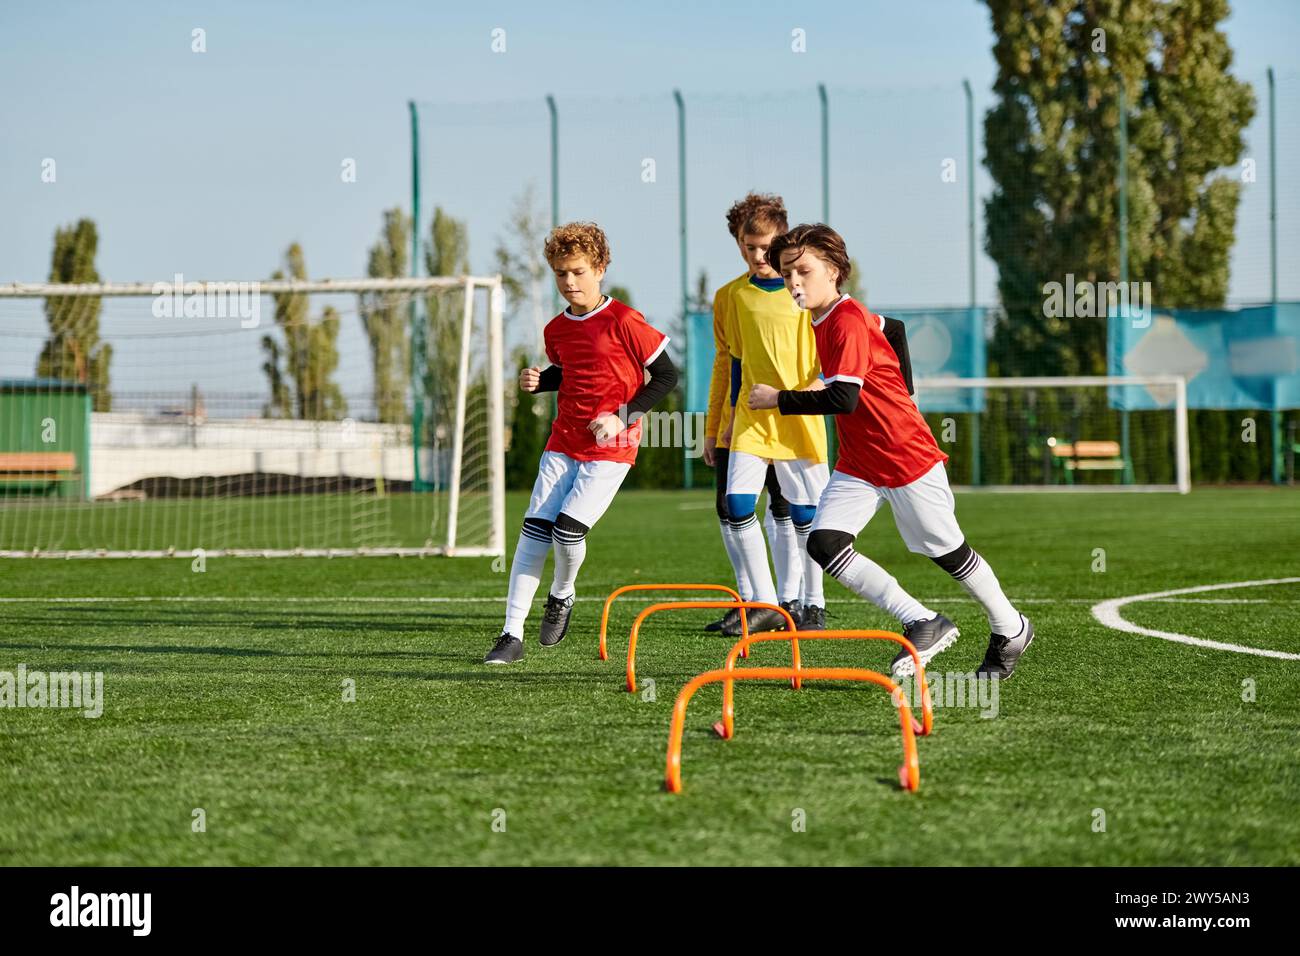 A group of young boys enthusiastically playing a game of soccer, kicking the ball back and forth, sprinting across the field, and joyfully celebrating Stock Photo